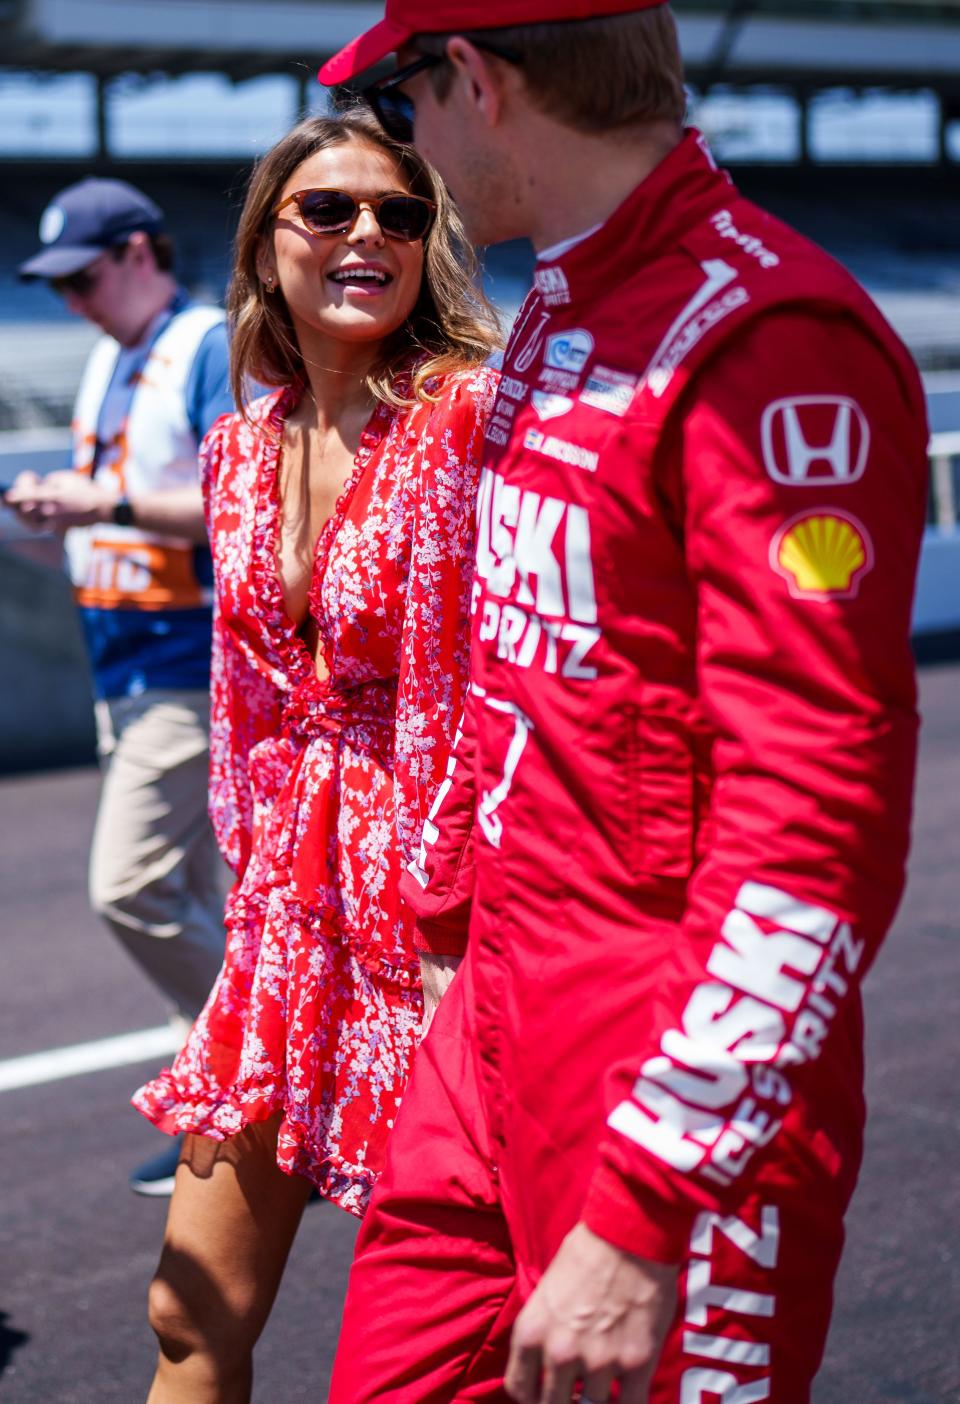 Reigning Indy 500 winner Marcus Ericsson laughs with girlfriend and model Iris Tritsaris on pit lane prior to last weekend's qualifying.